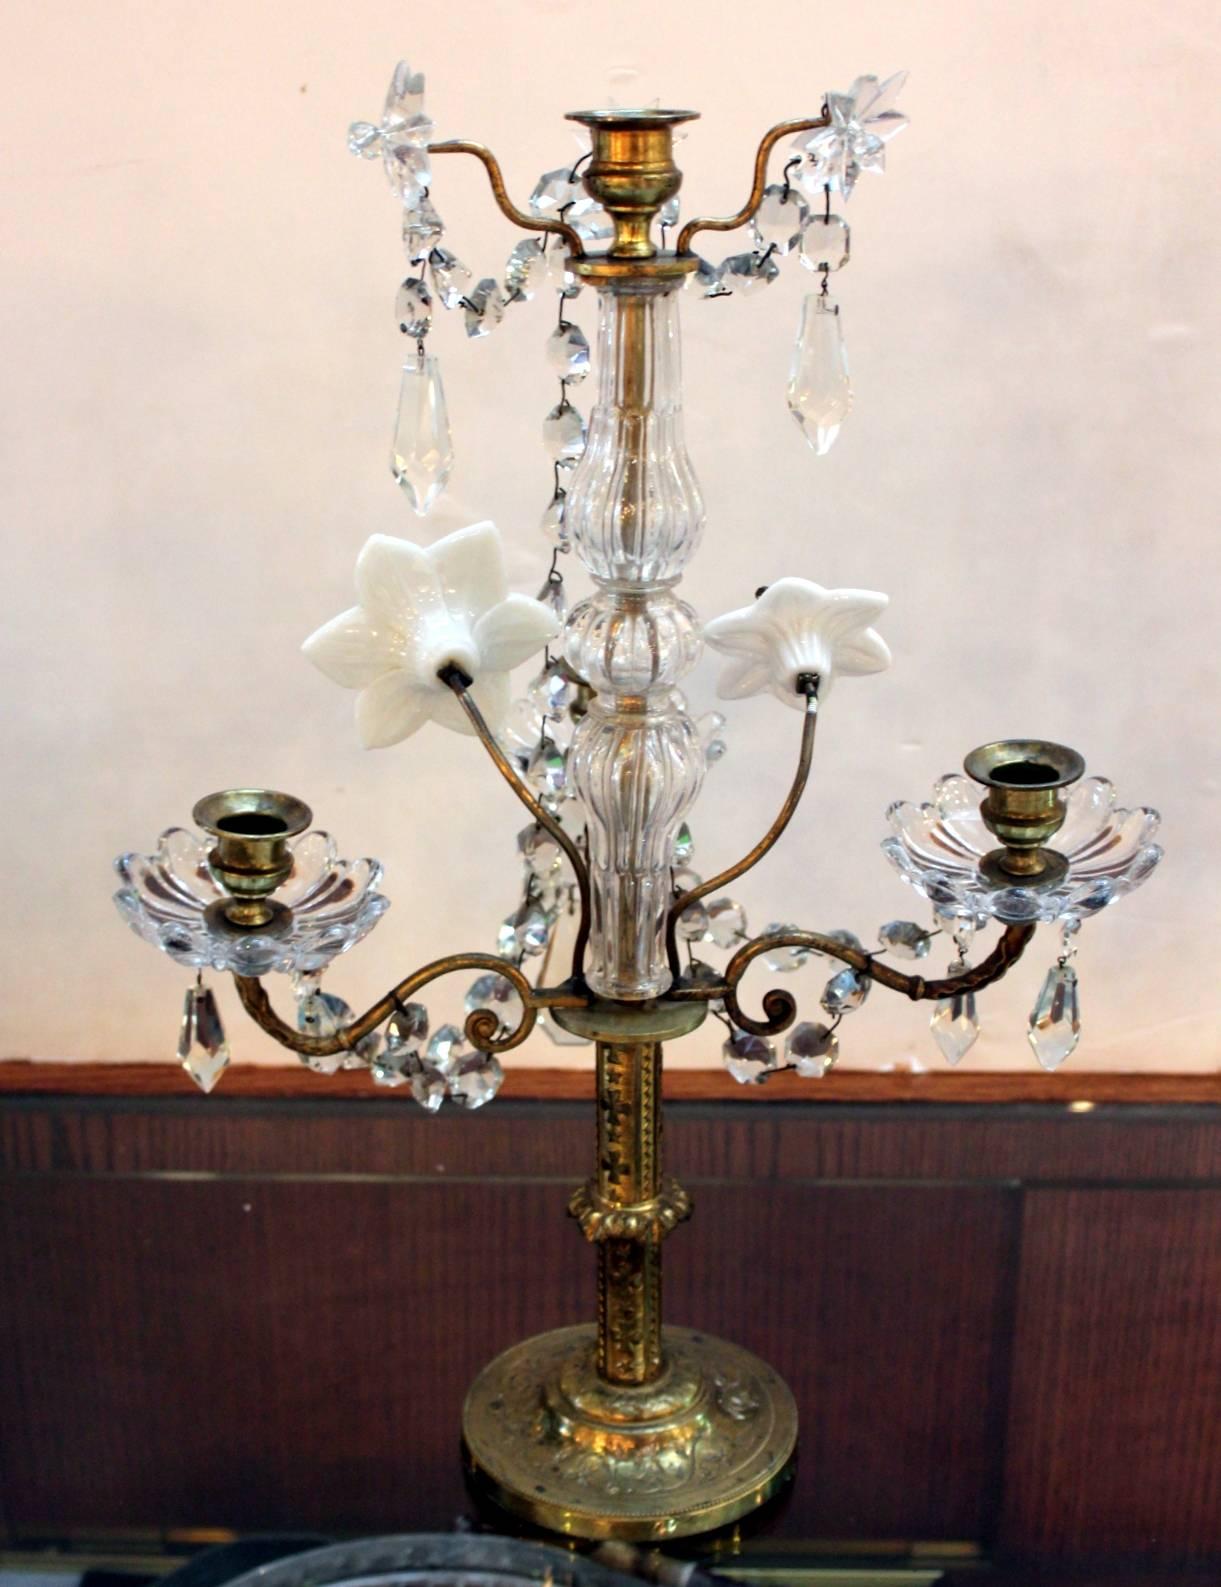 Beautiful pair of French crystal and opaline glass girandoles with four arms. This pair accommodates candles with one center and three additional arms in the front., the center portion has handmade white oplaine glass flowers with overall glass